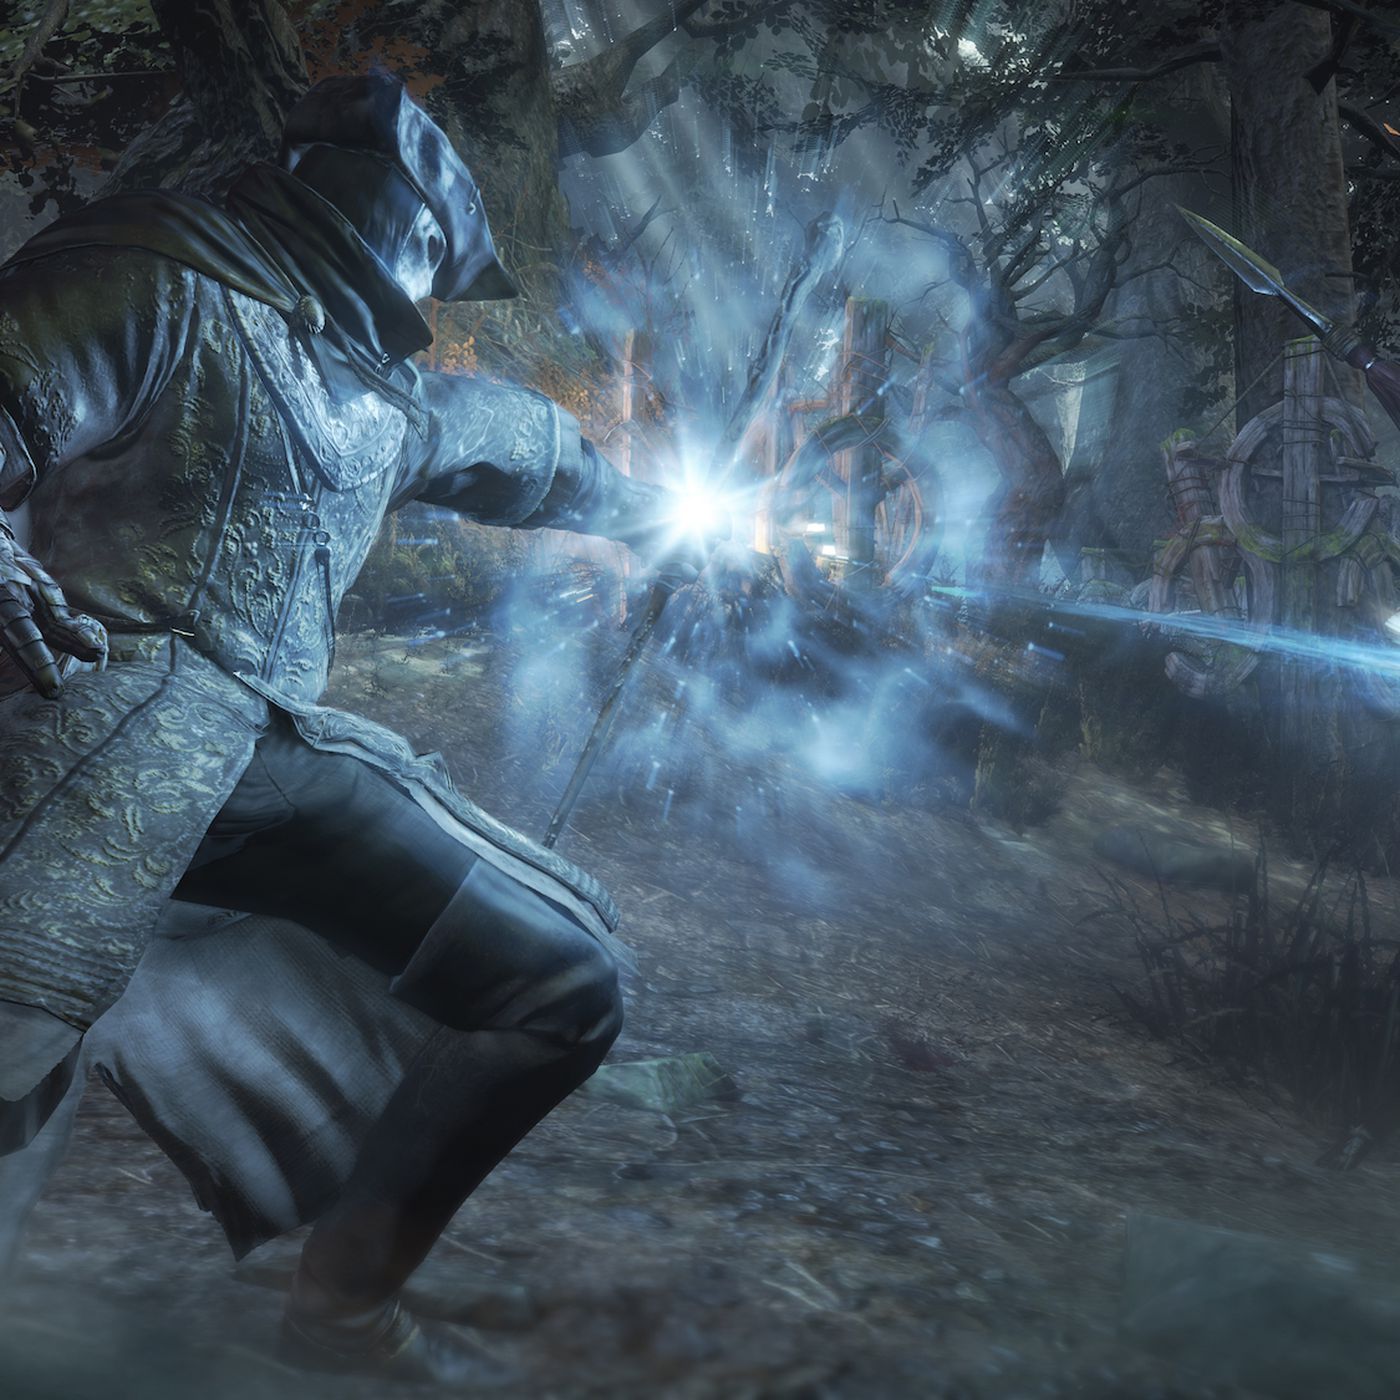 Dark Souls 3 nails down its April 2016 release date